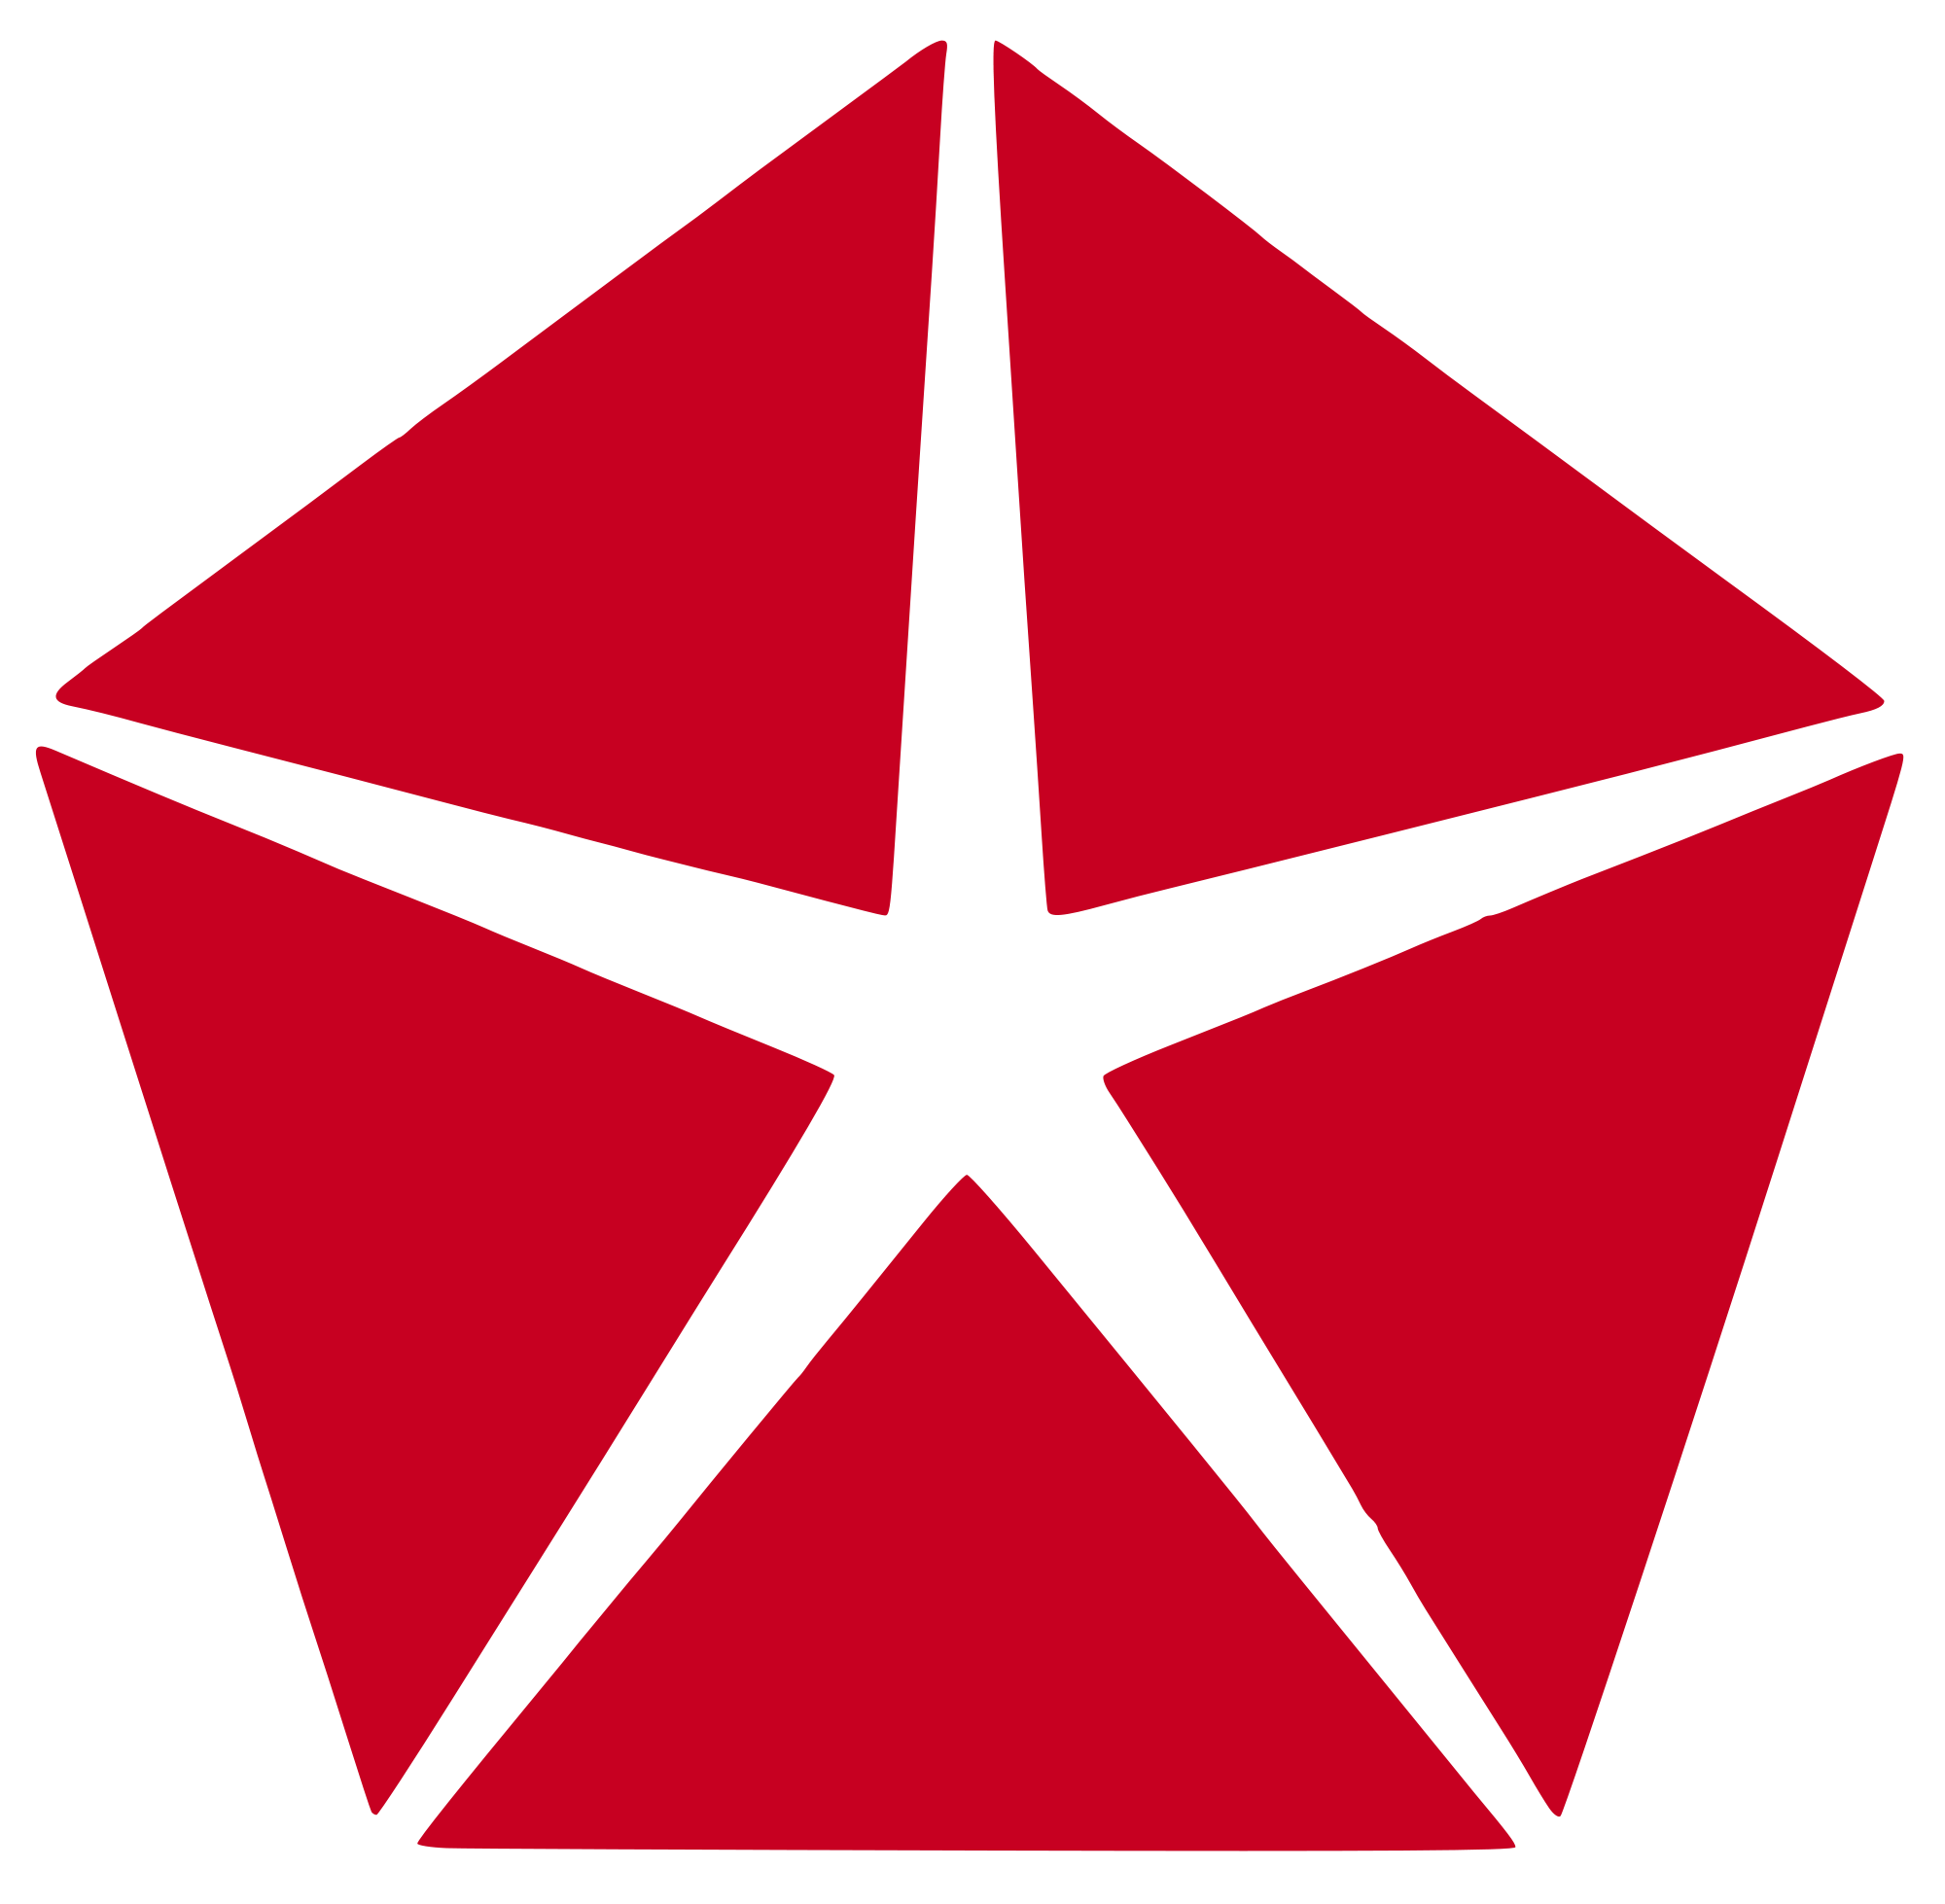 Red and White Star Logo - File:Dodge Red Pentastar.svg - Wikimedia Commons